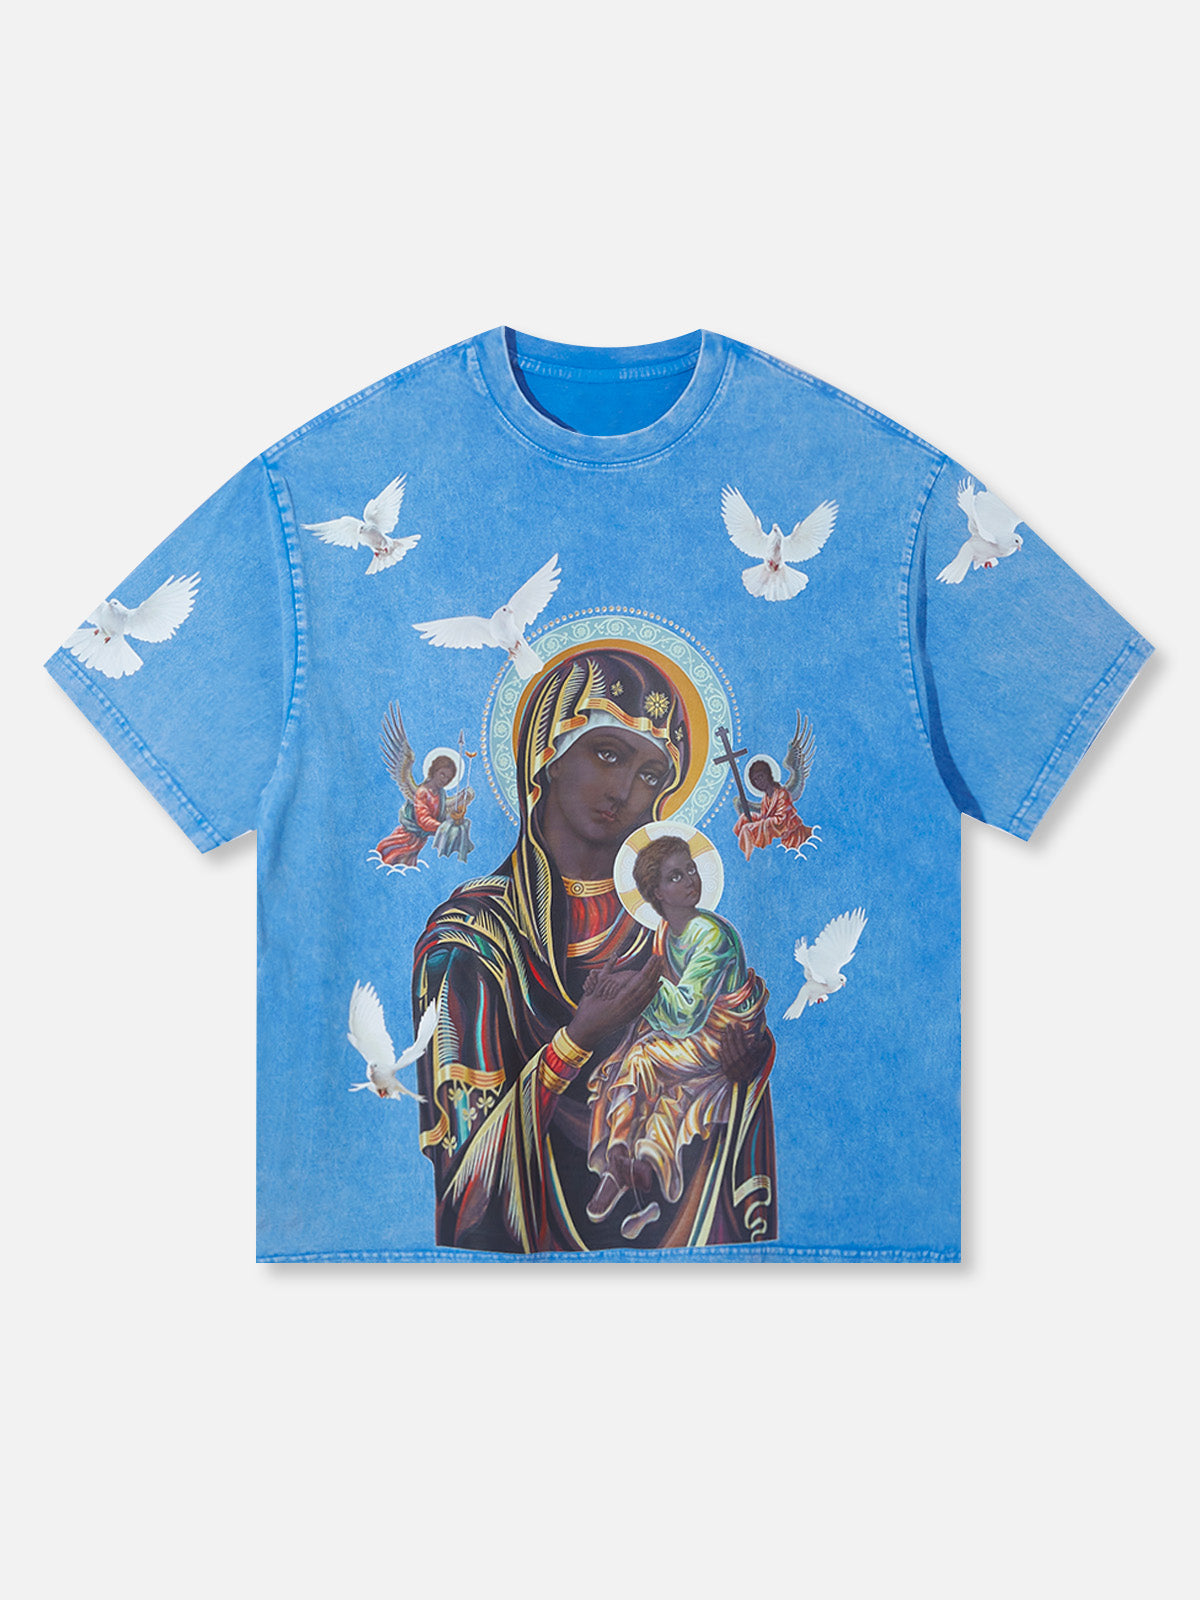 OBSTACLES & DANGERS© Black Madonna and Child Blue T-shirt – NOISSEY